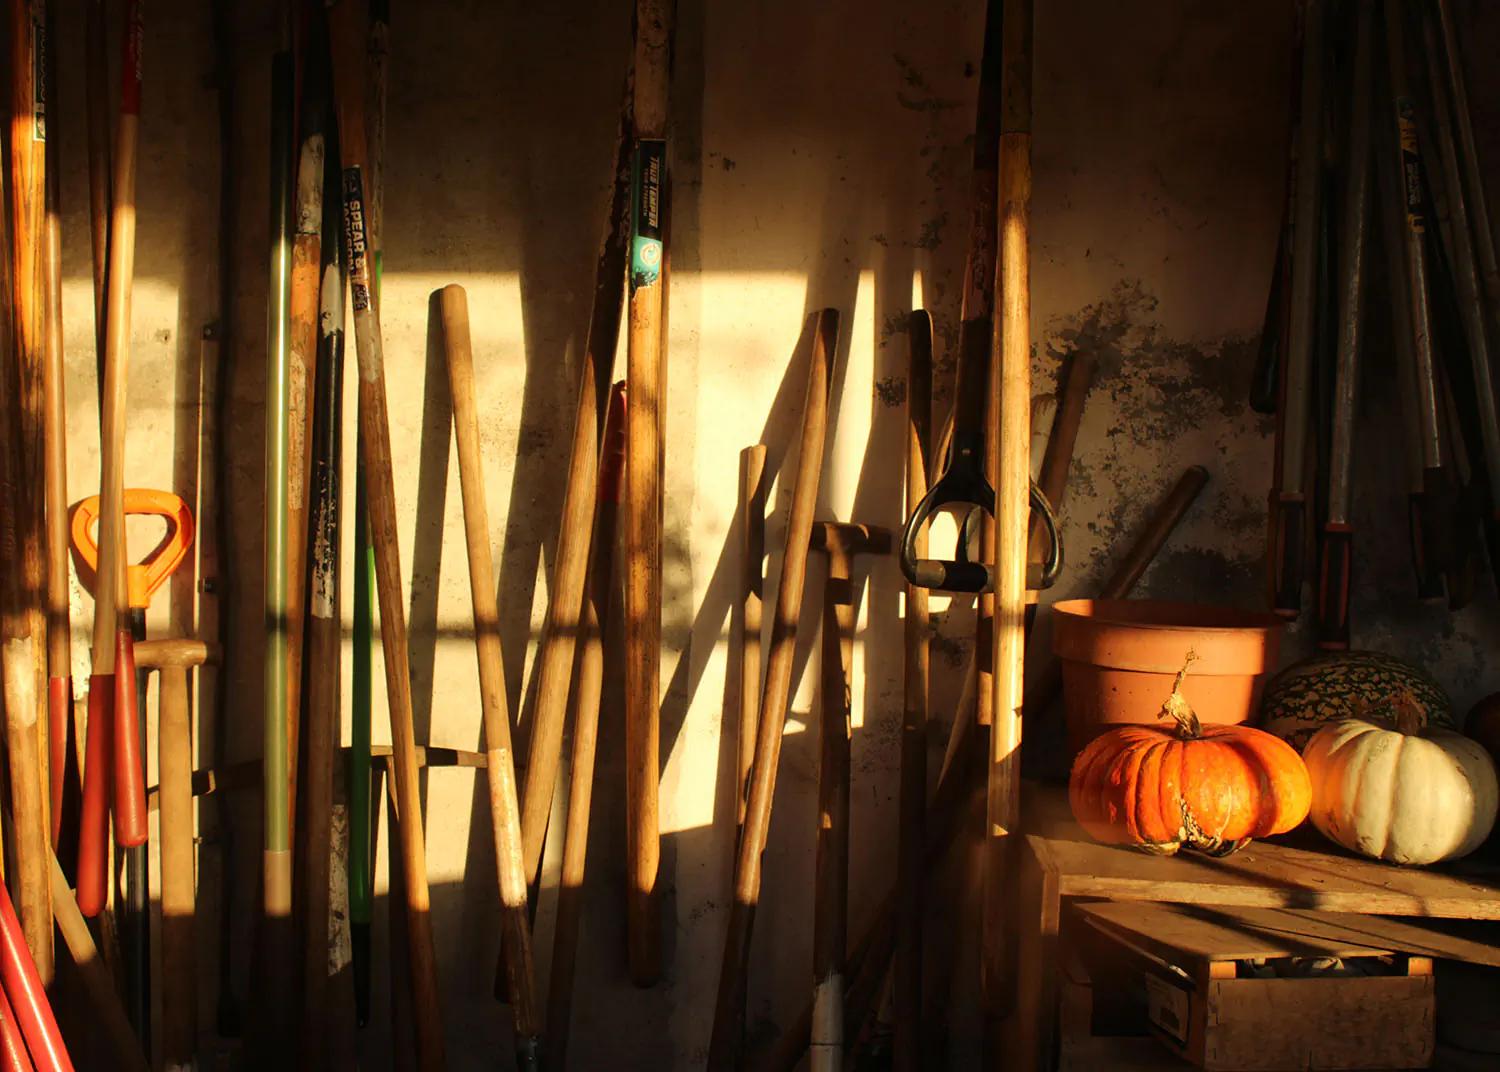 Gardening tools and pumpkins in evening light in a shed